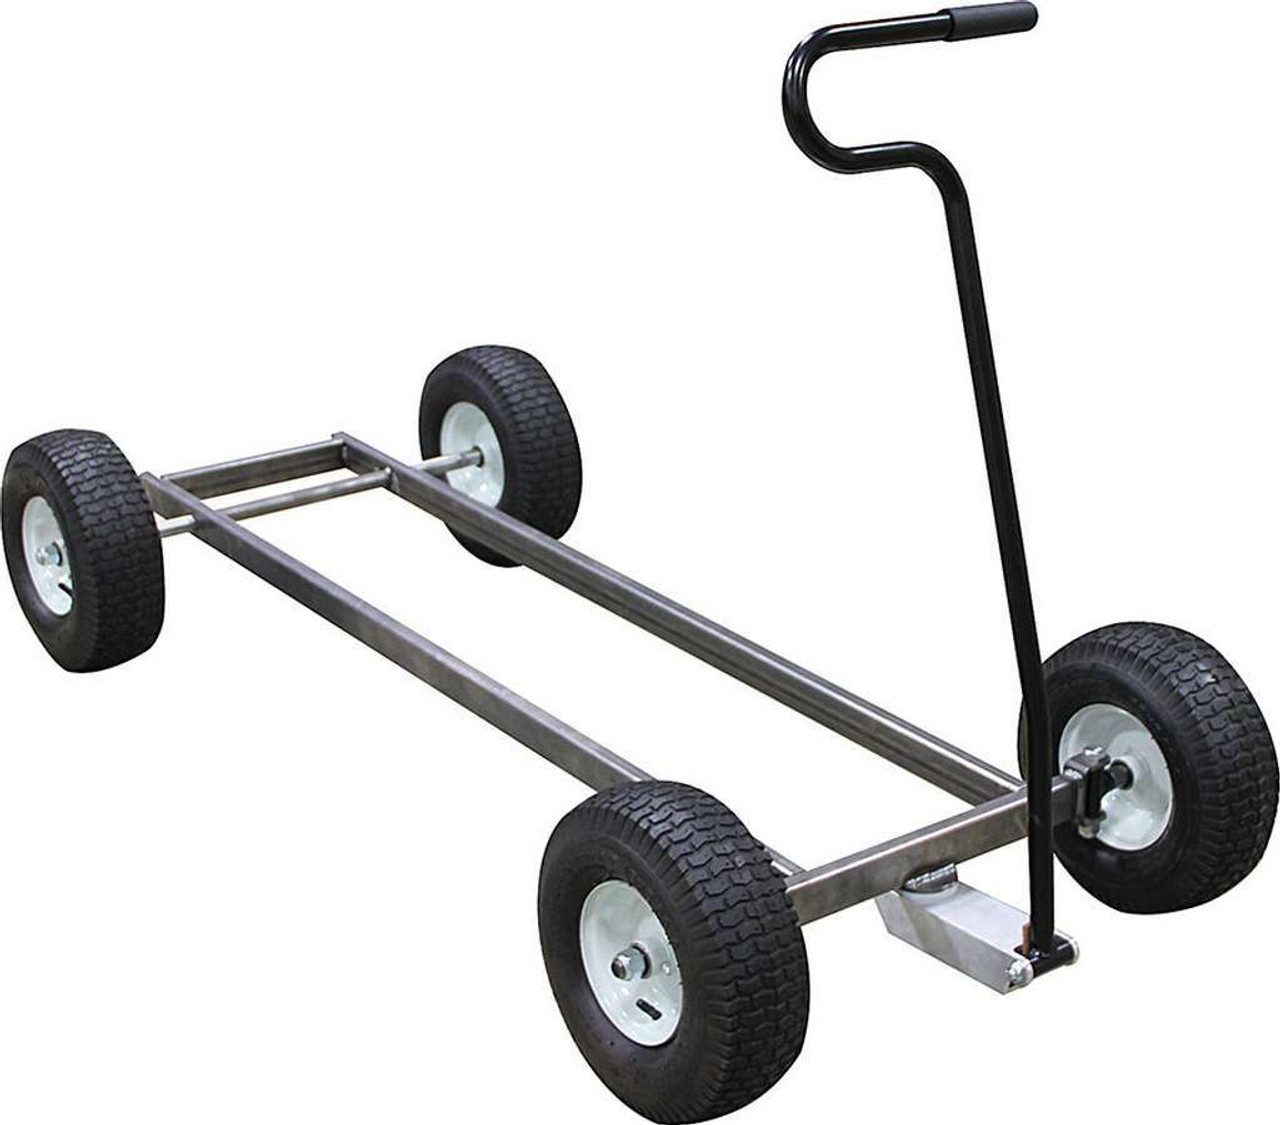 Cart has a pre-assembled front axle assembly to create a pre-determined overall width of 33. Frame width is designed to be 14 and a maximum frame length of 60 with a 53 wheelbase. Frame may be shortened as needed.Weight capacity is 1500lbs. Handle is 38 tall 22 between the tires Tire size is 13x5.00-6Kit includes the following components: ALL10601 Pit Cart Chassis ALL10602 Wheel Kit for Pit Cart